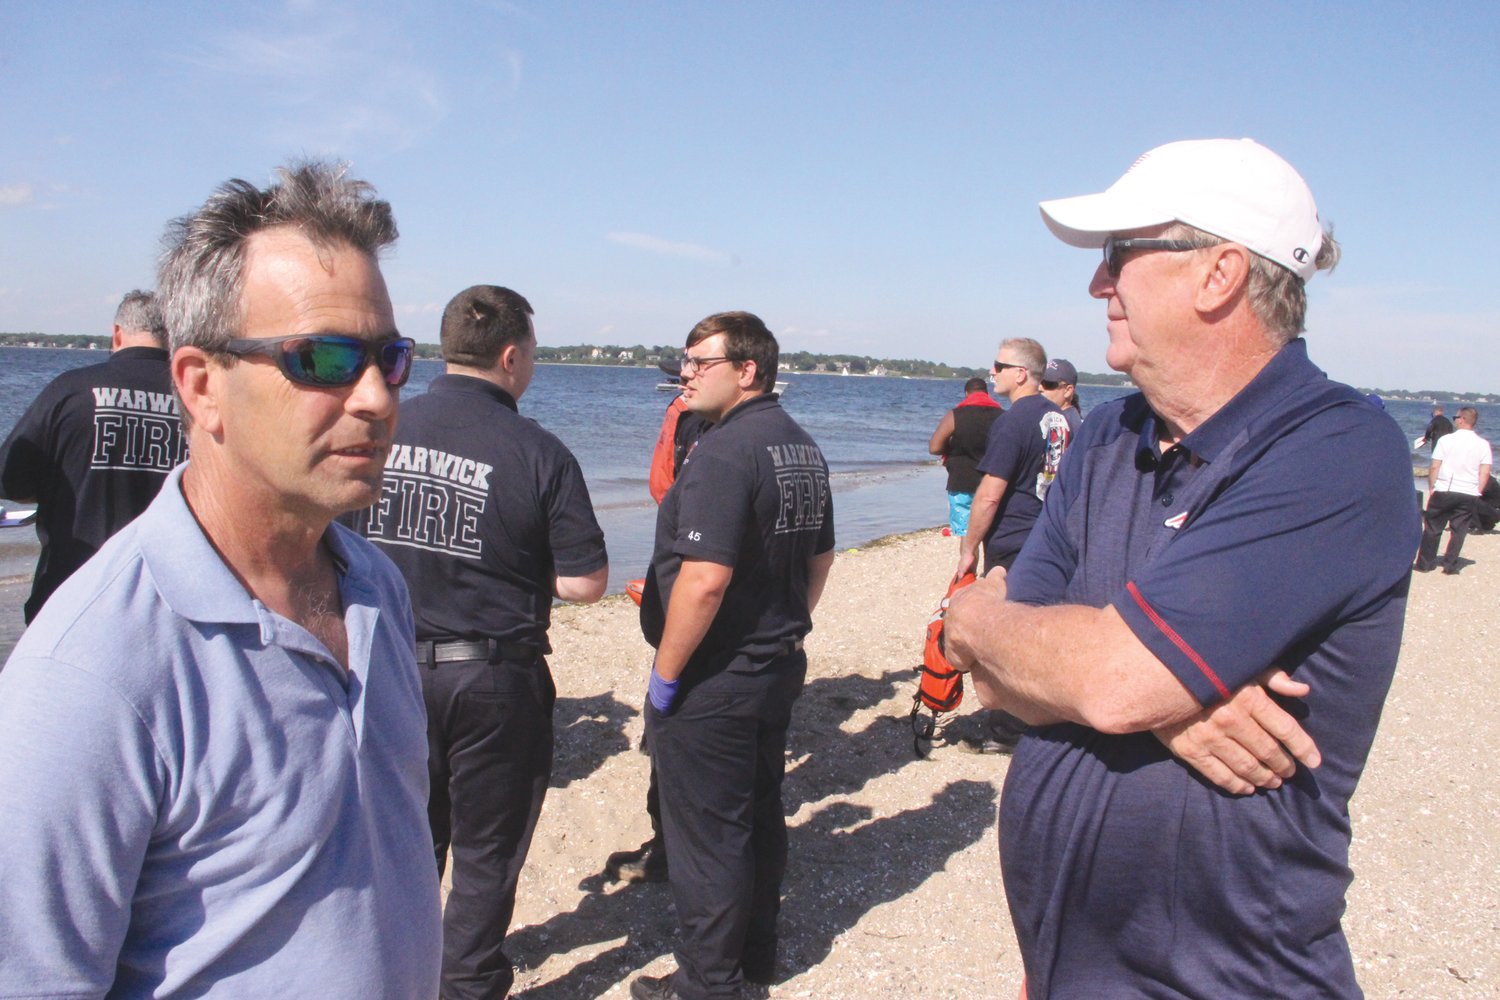 THE LONG WAIT: Mayors Frank Picozzi and Ken Hopkins could do little but wait during the search to recover the two drowning victims.